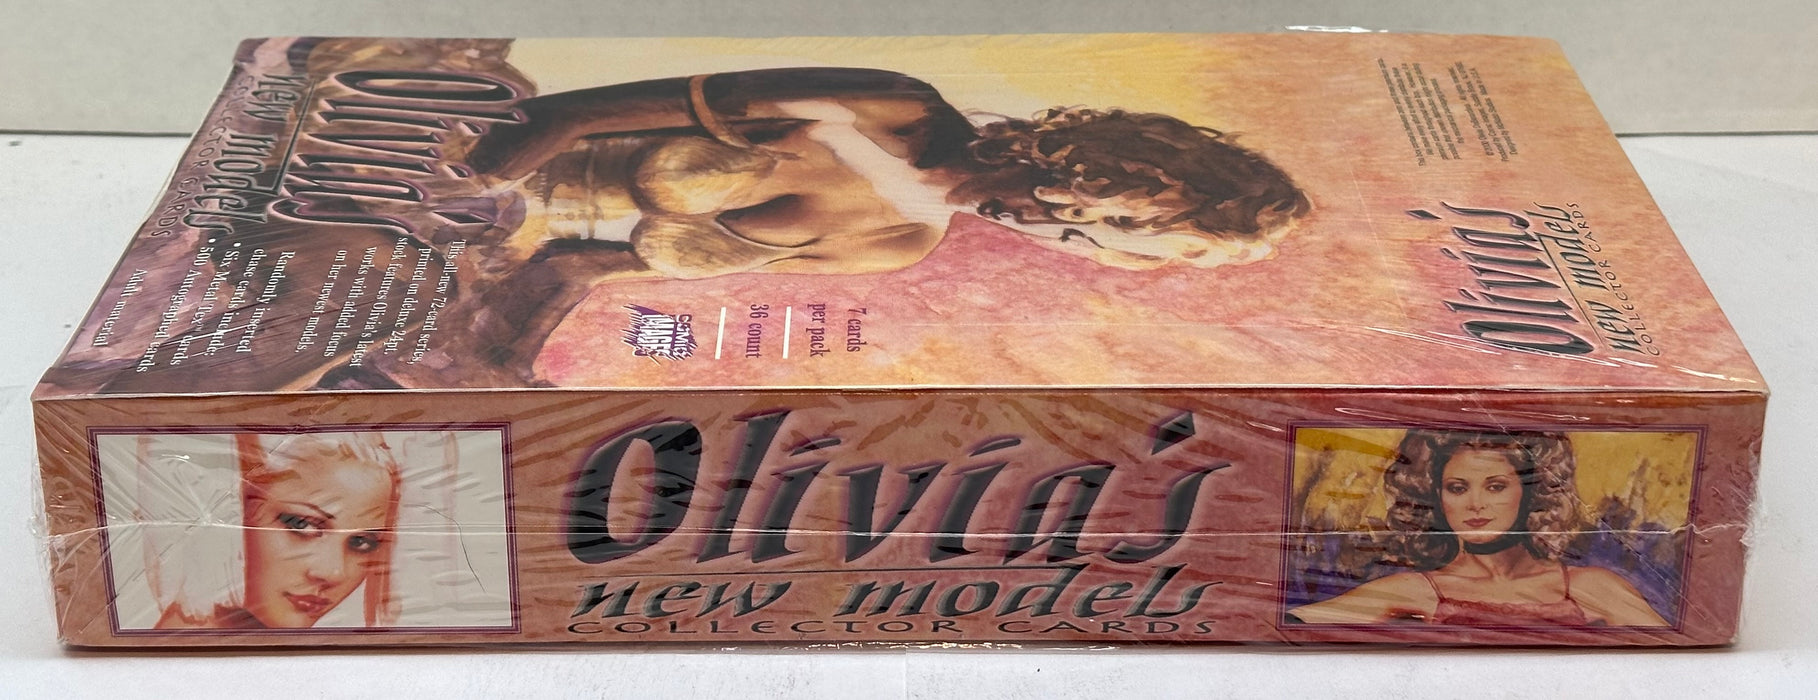 2001 Olivia's New Models Trading Card Box Comic Images Factory Sealed 36 CT   - TvMovieCards.com